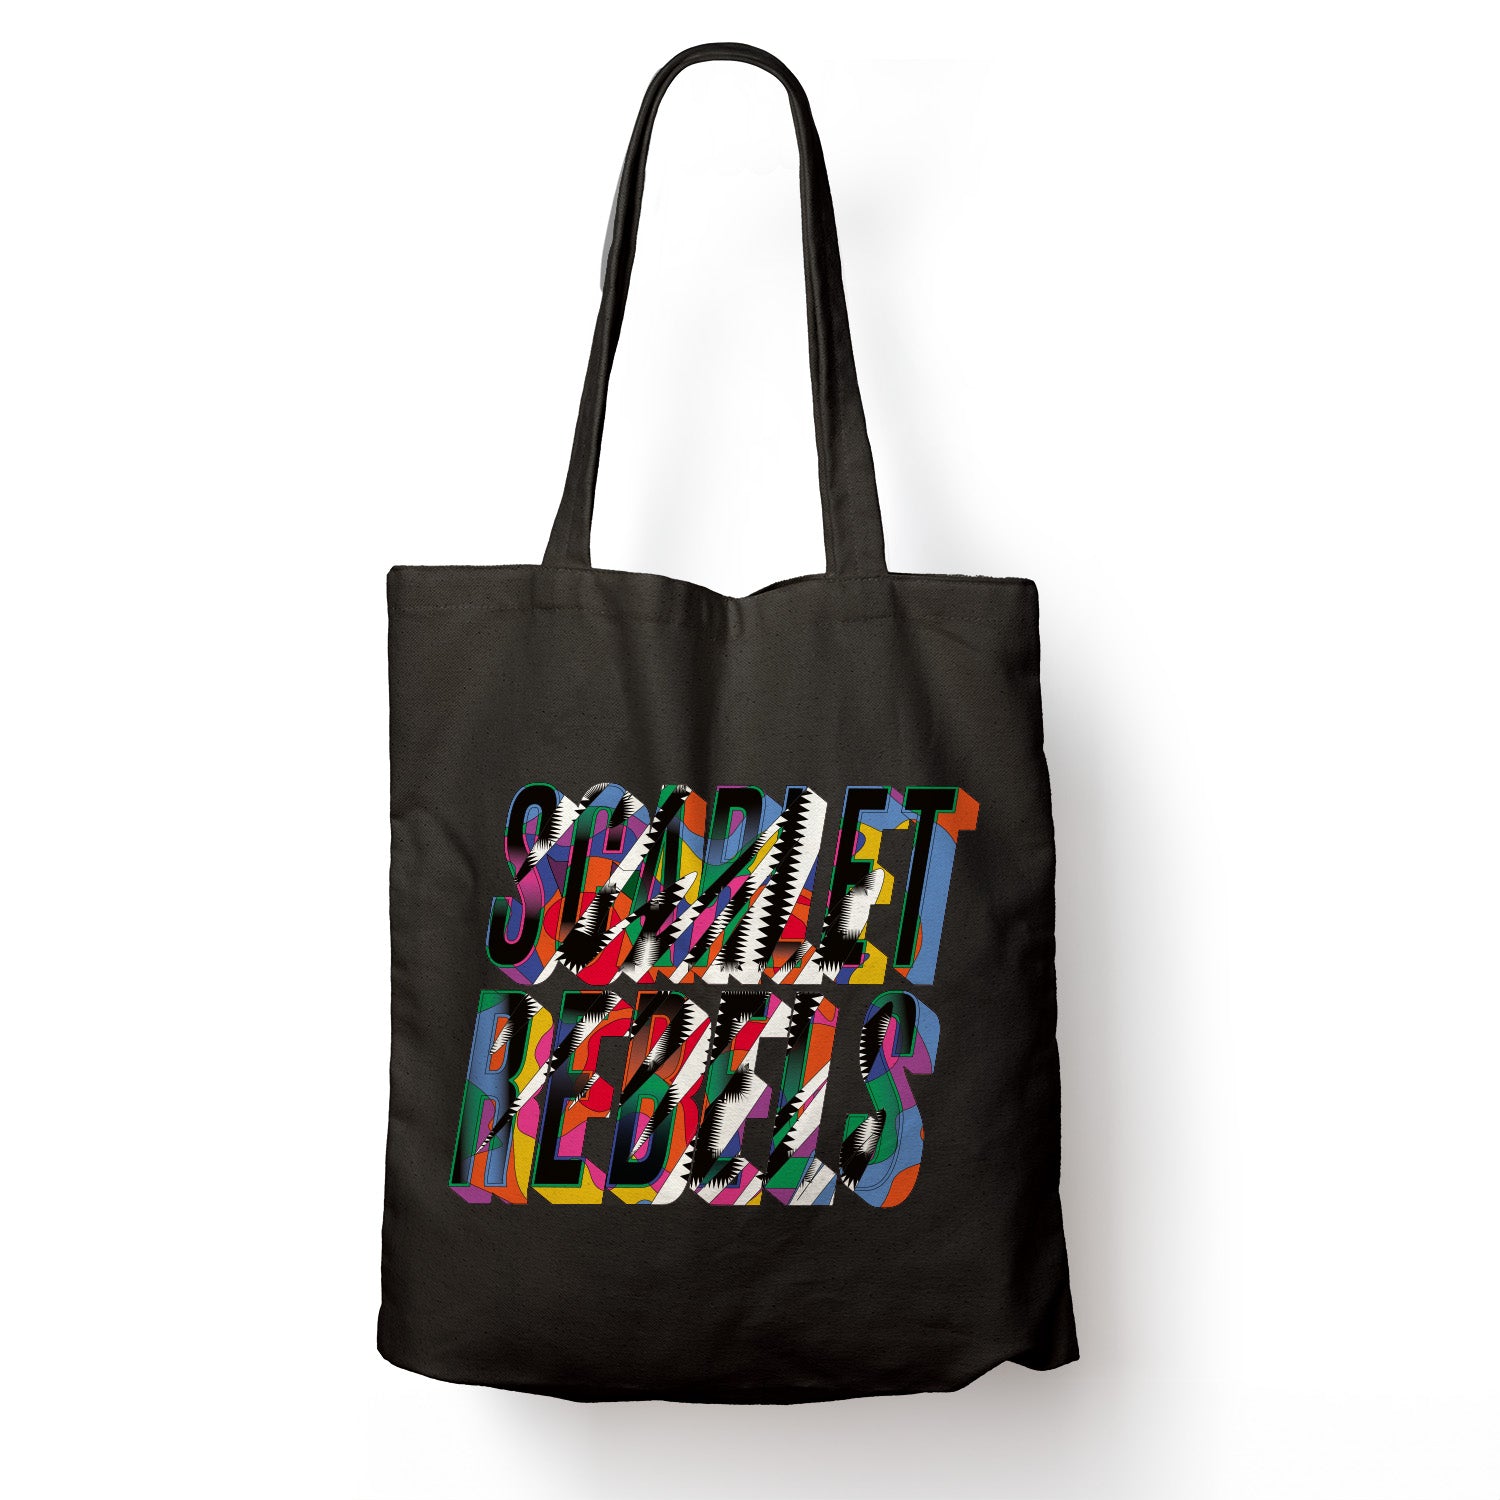 Scarlet Rebels "Where The Colours Meet" Tote Bag - PRE-ORDER